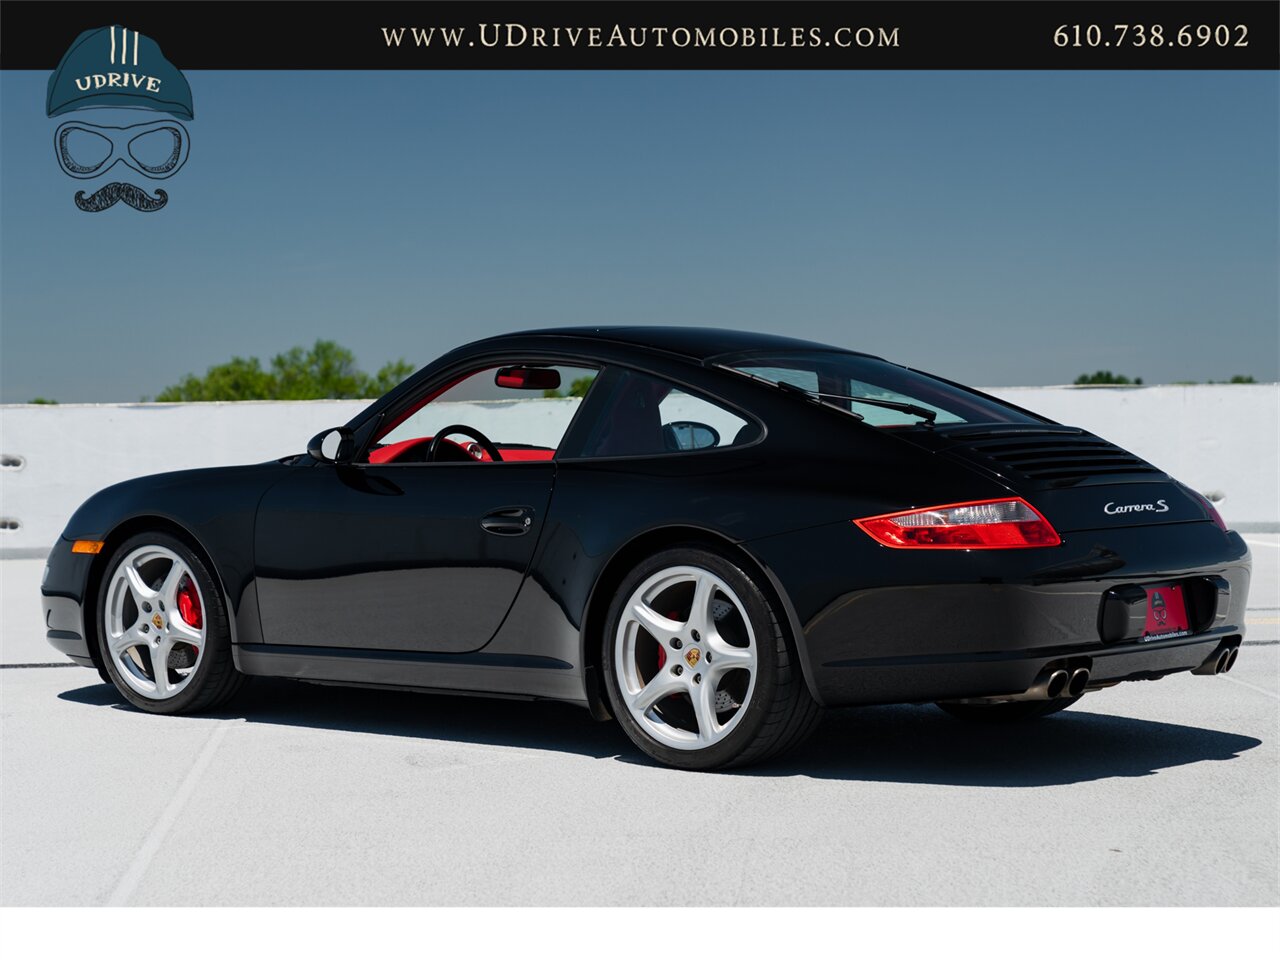 2005 Porsche 911 Carrera 911S 997 6 Speed 13k Miles Chrono  Leather to Sample Boxster Red/Blk Service History - Photo 23 - West Chester, PA 19382